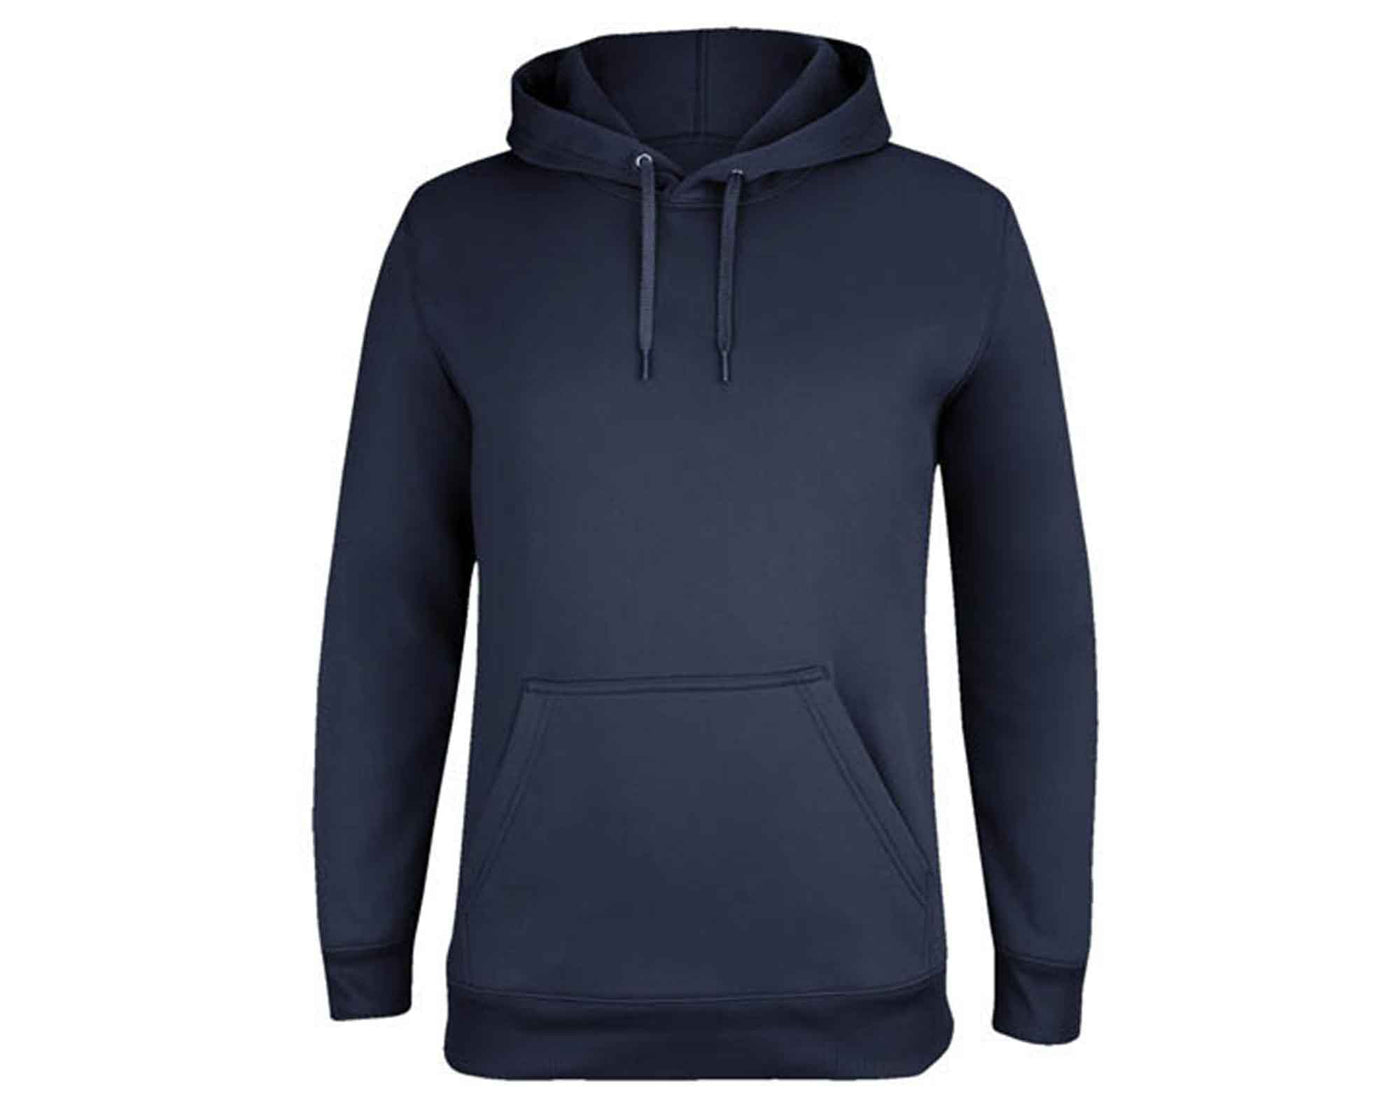 Navy blue hoodie with pocket in front and drawcord